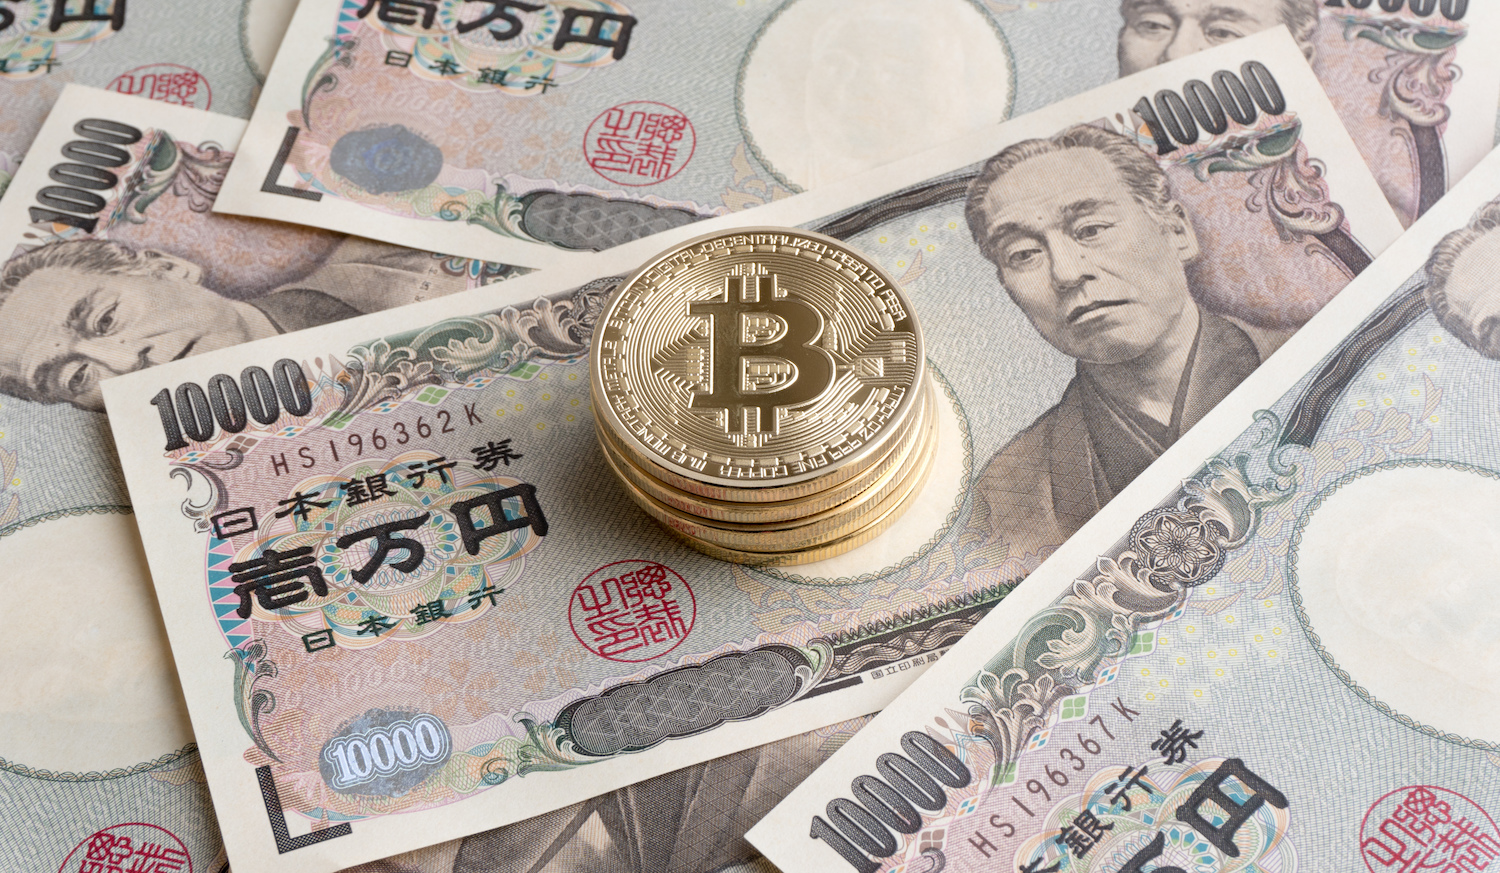 Japanese Lawmaker Proposes 4 Changes To Ease Crypto Tax Burden